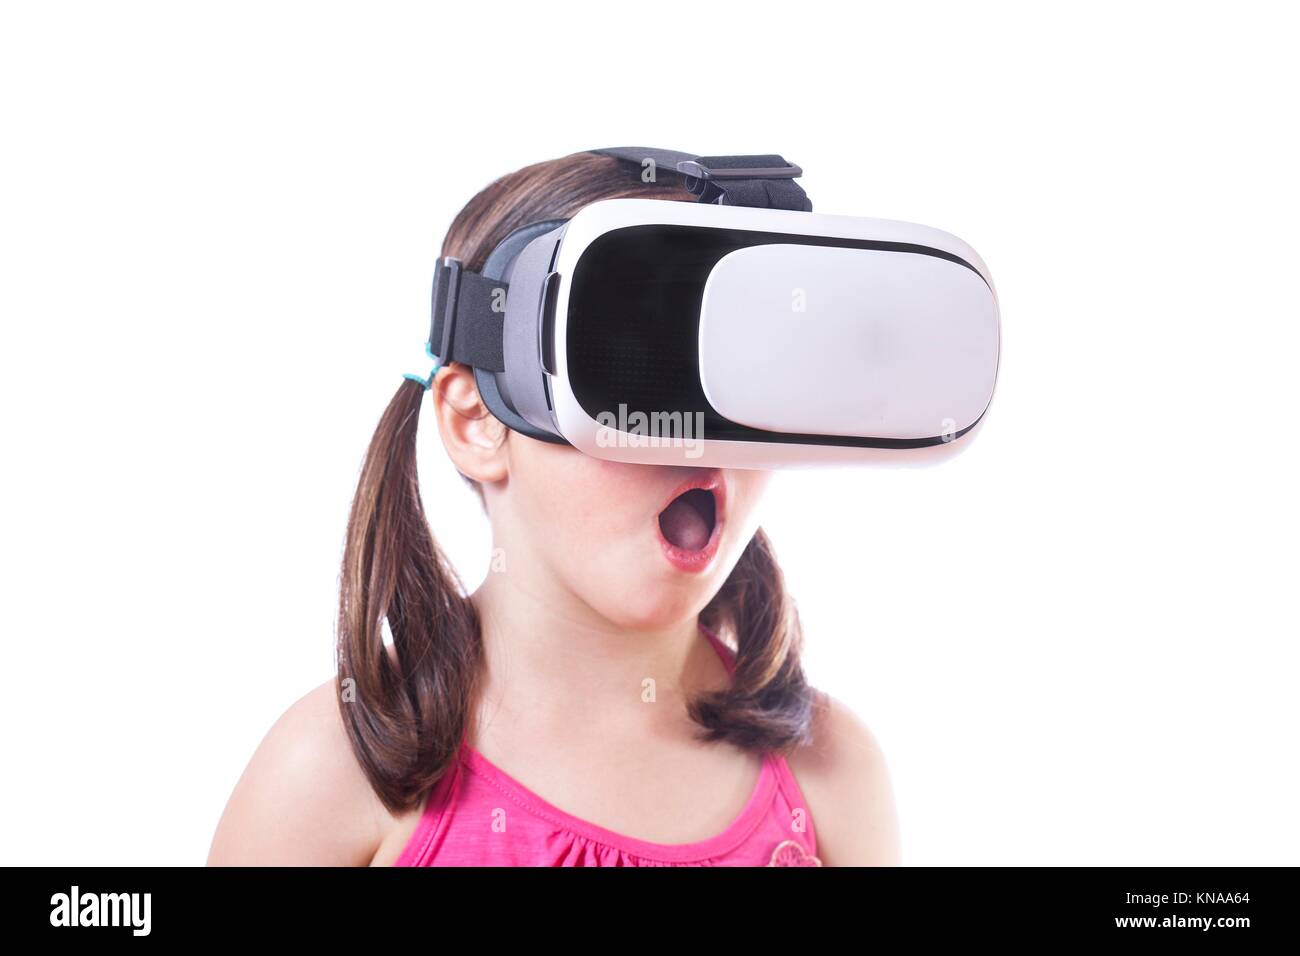 Little girl with virtual reality glasses. Isolated on white background. She is amazed. Stock Photo